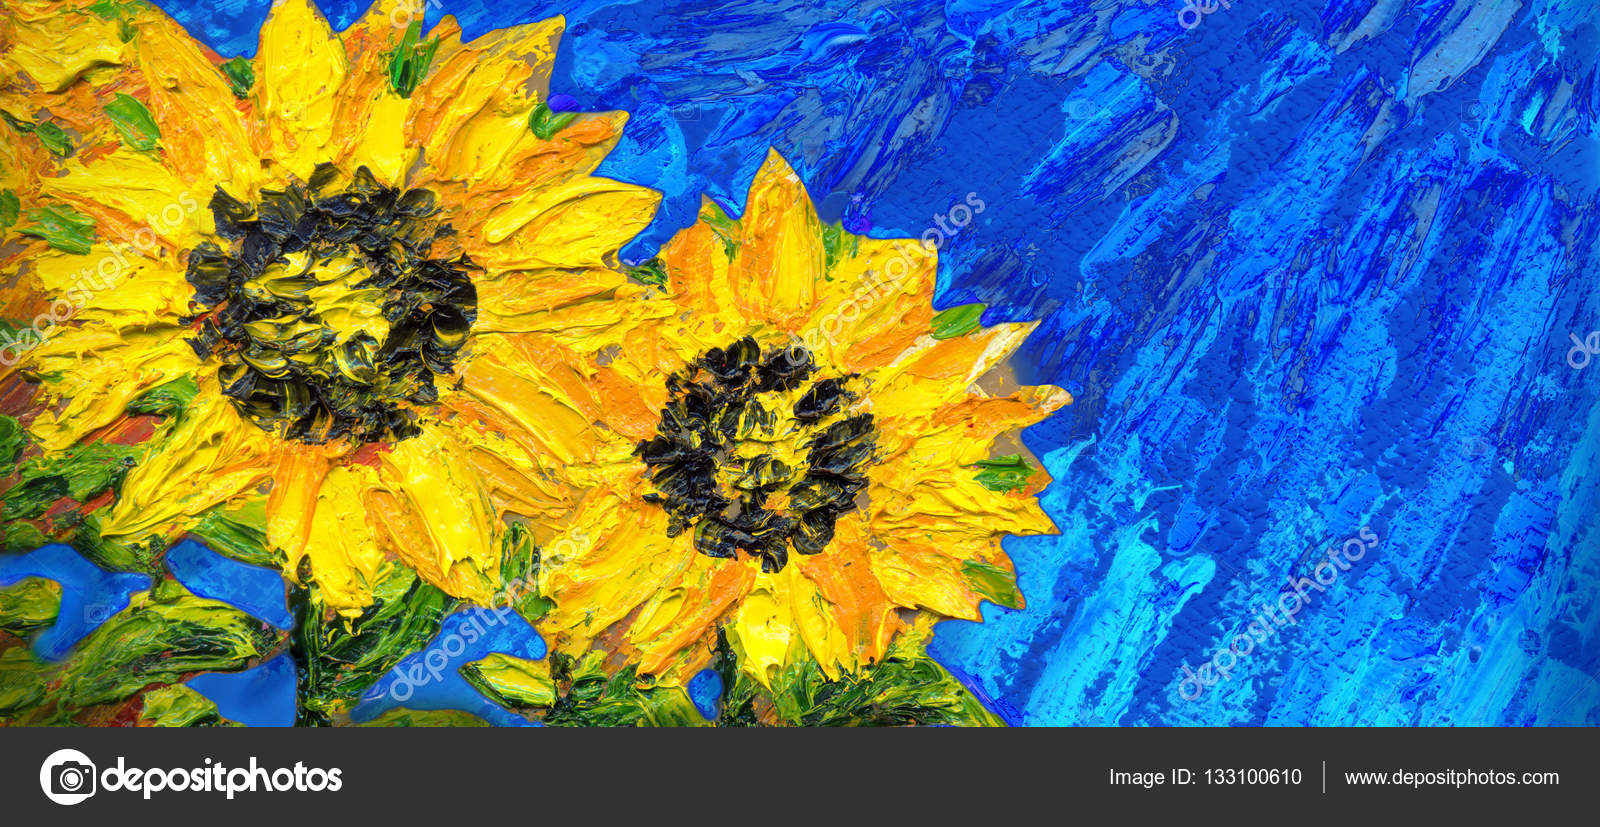 Abstract Sunflower Field Painting